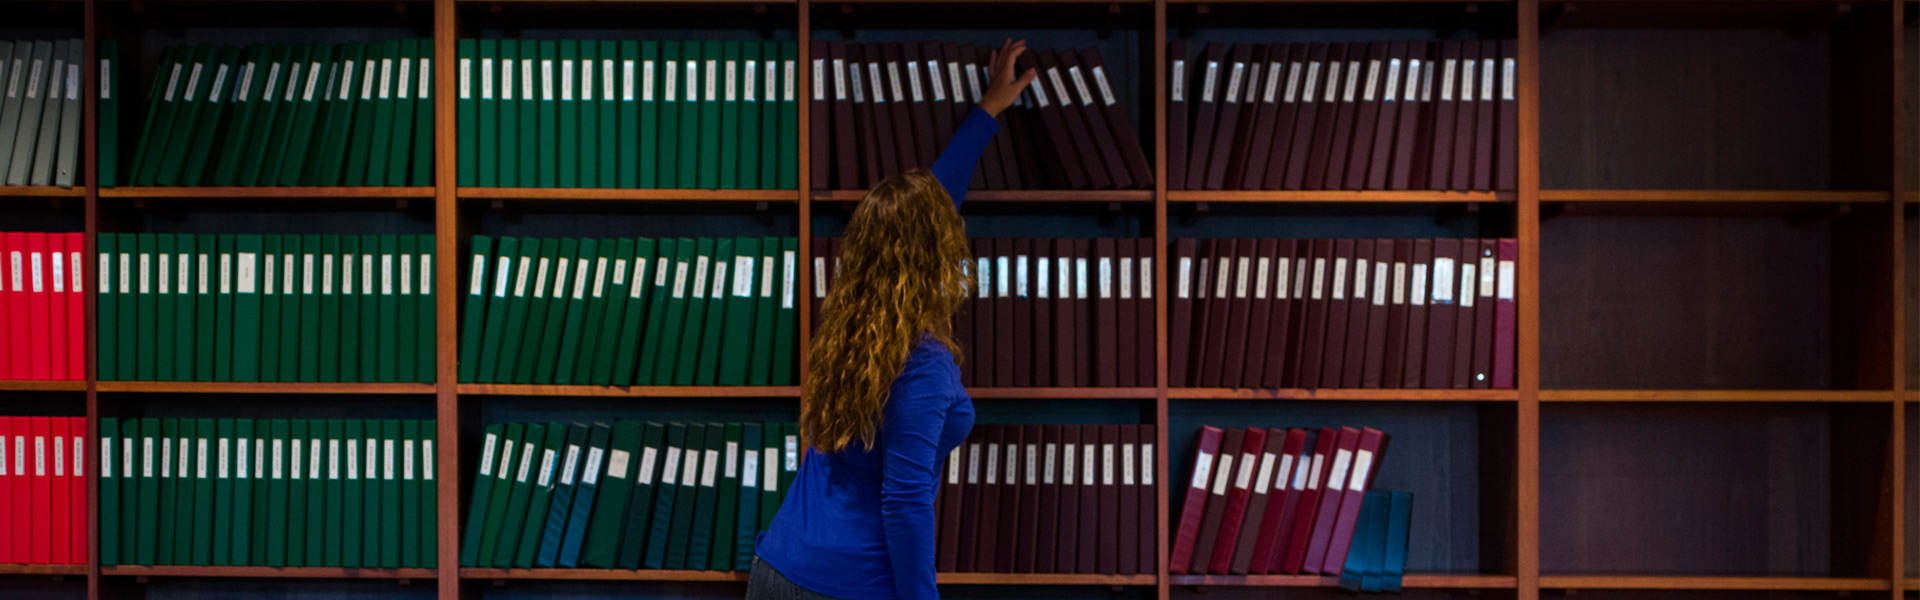 Woman reaching for books in library